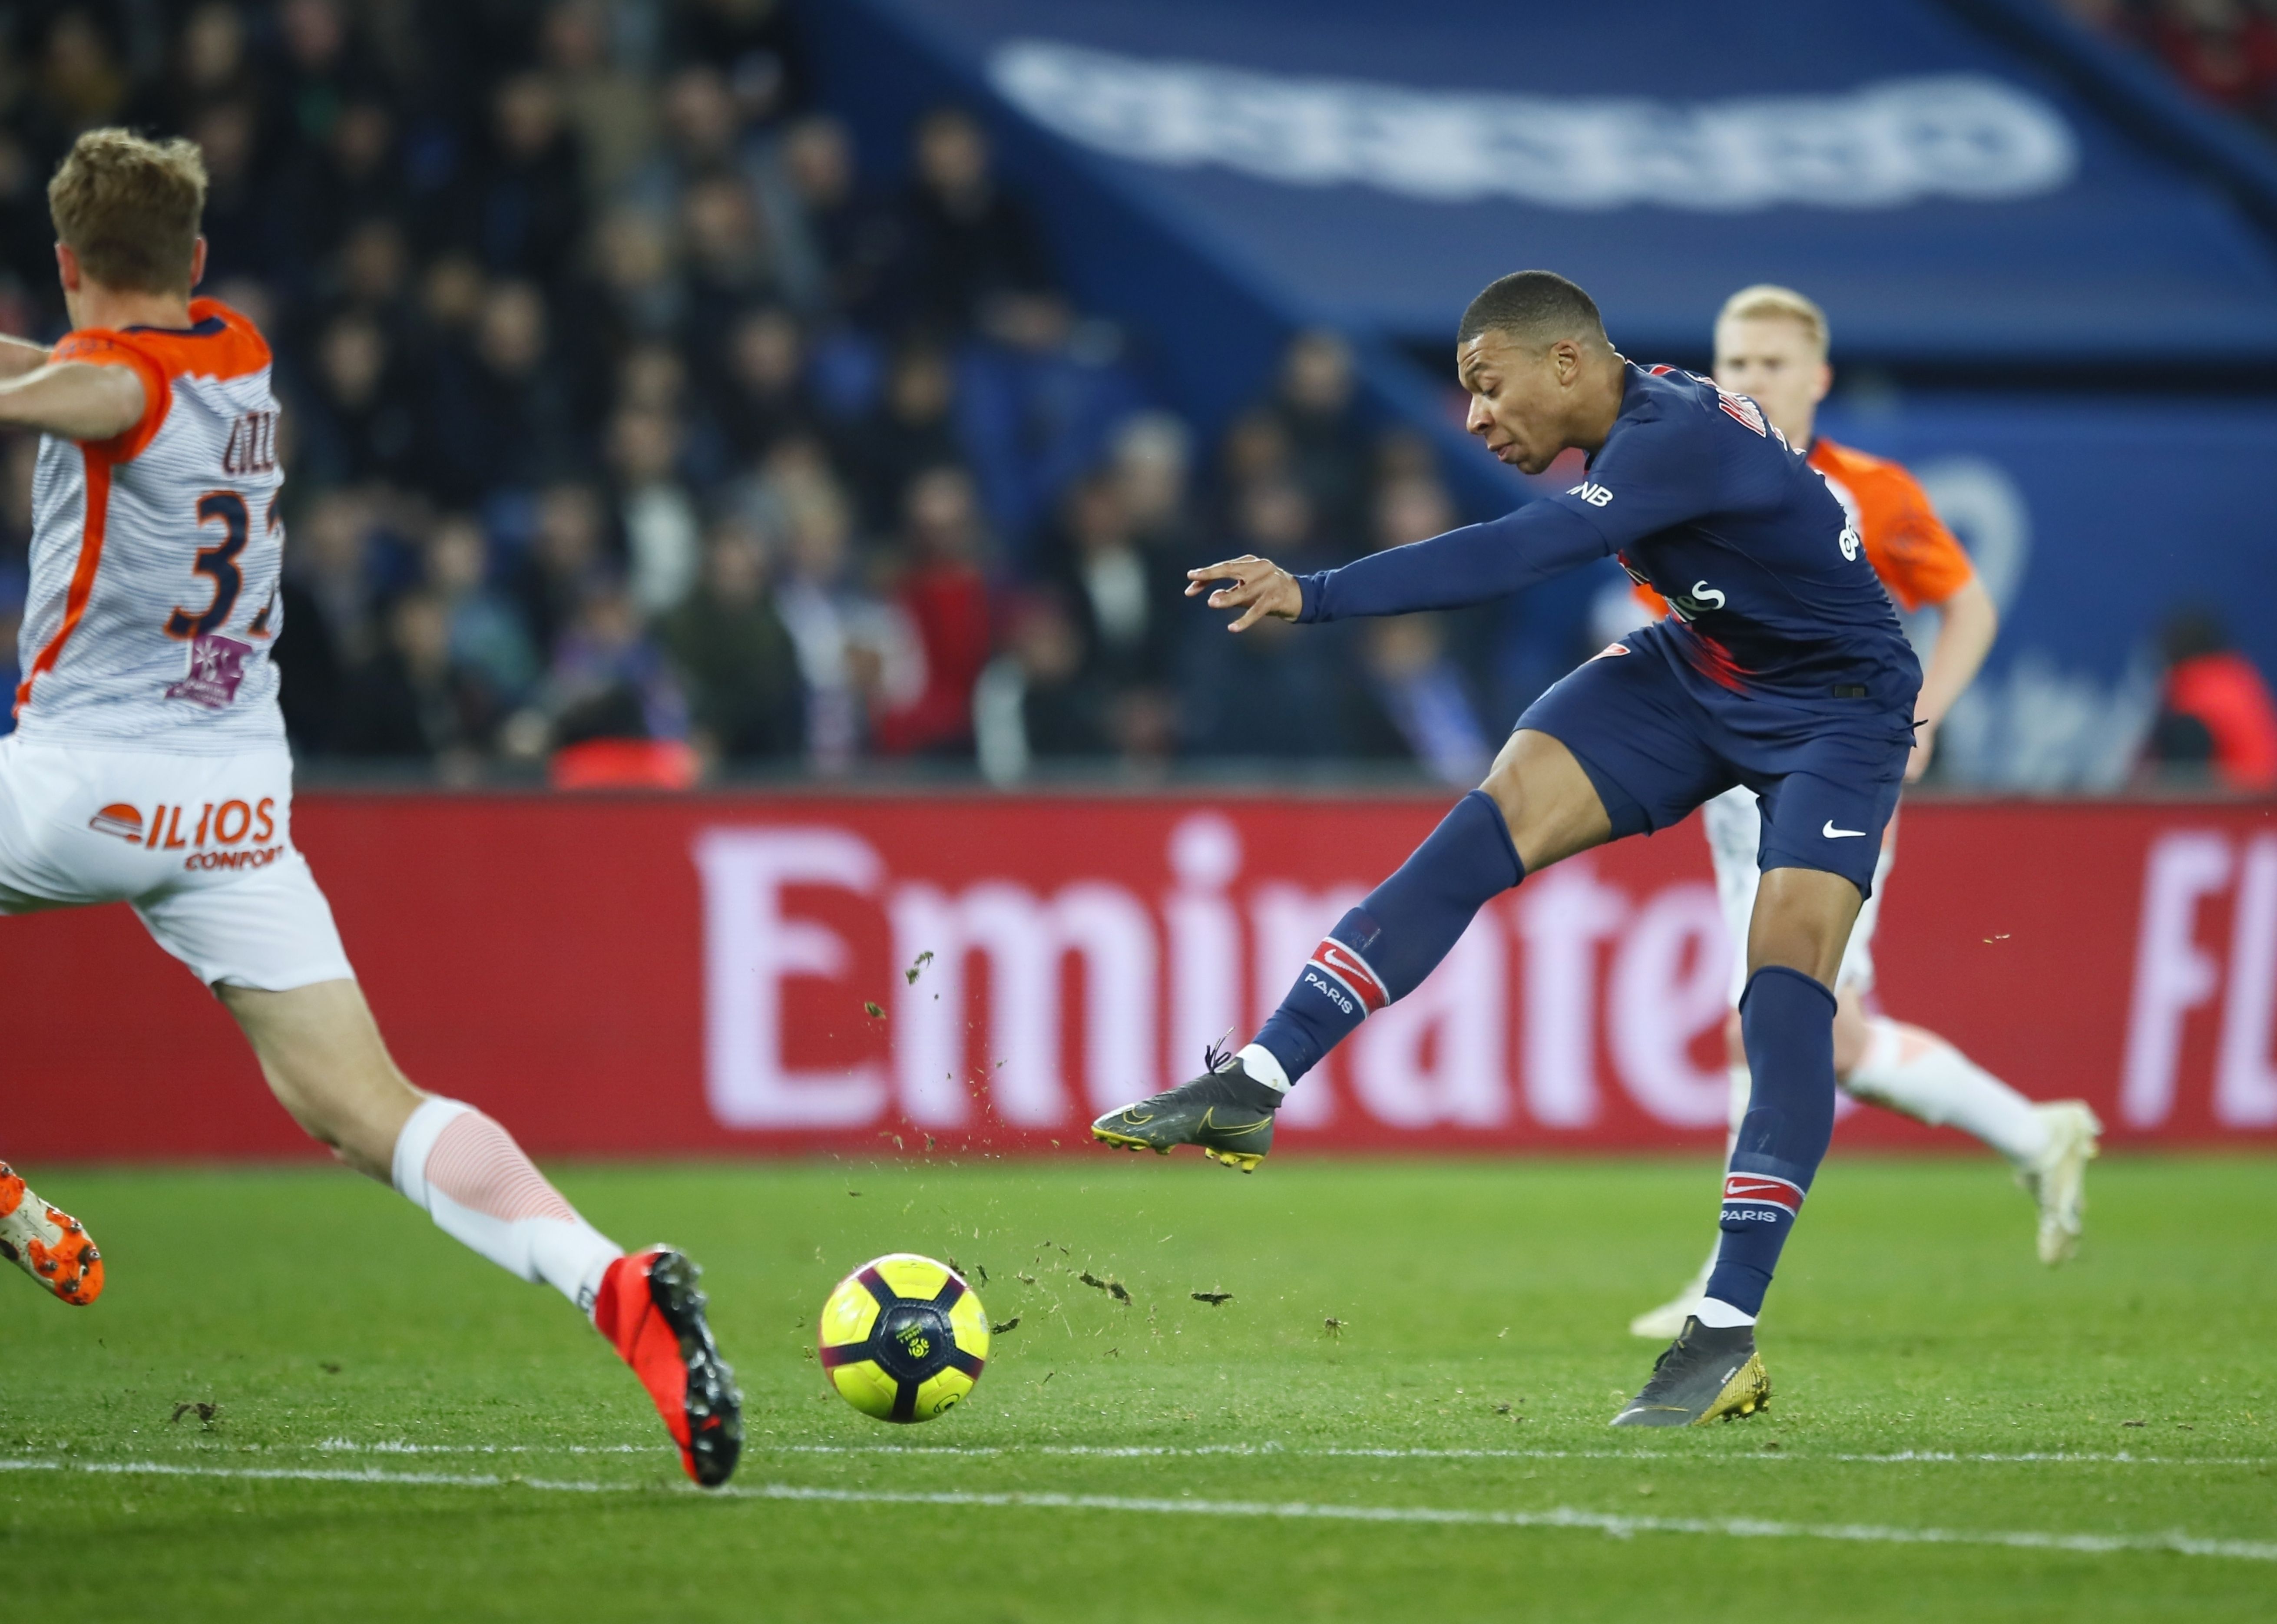  Kylian Mbappe in a blue and red jersey is about to kick the ball into the goal while playing in a Champions League match.